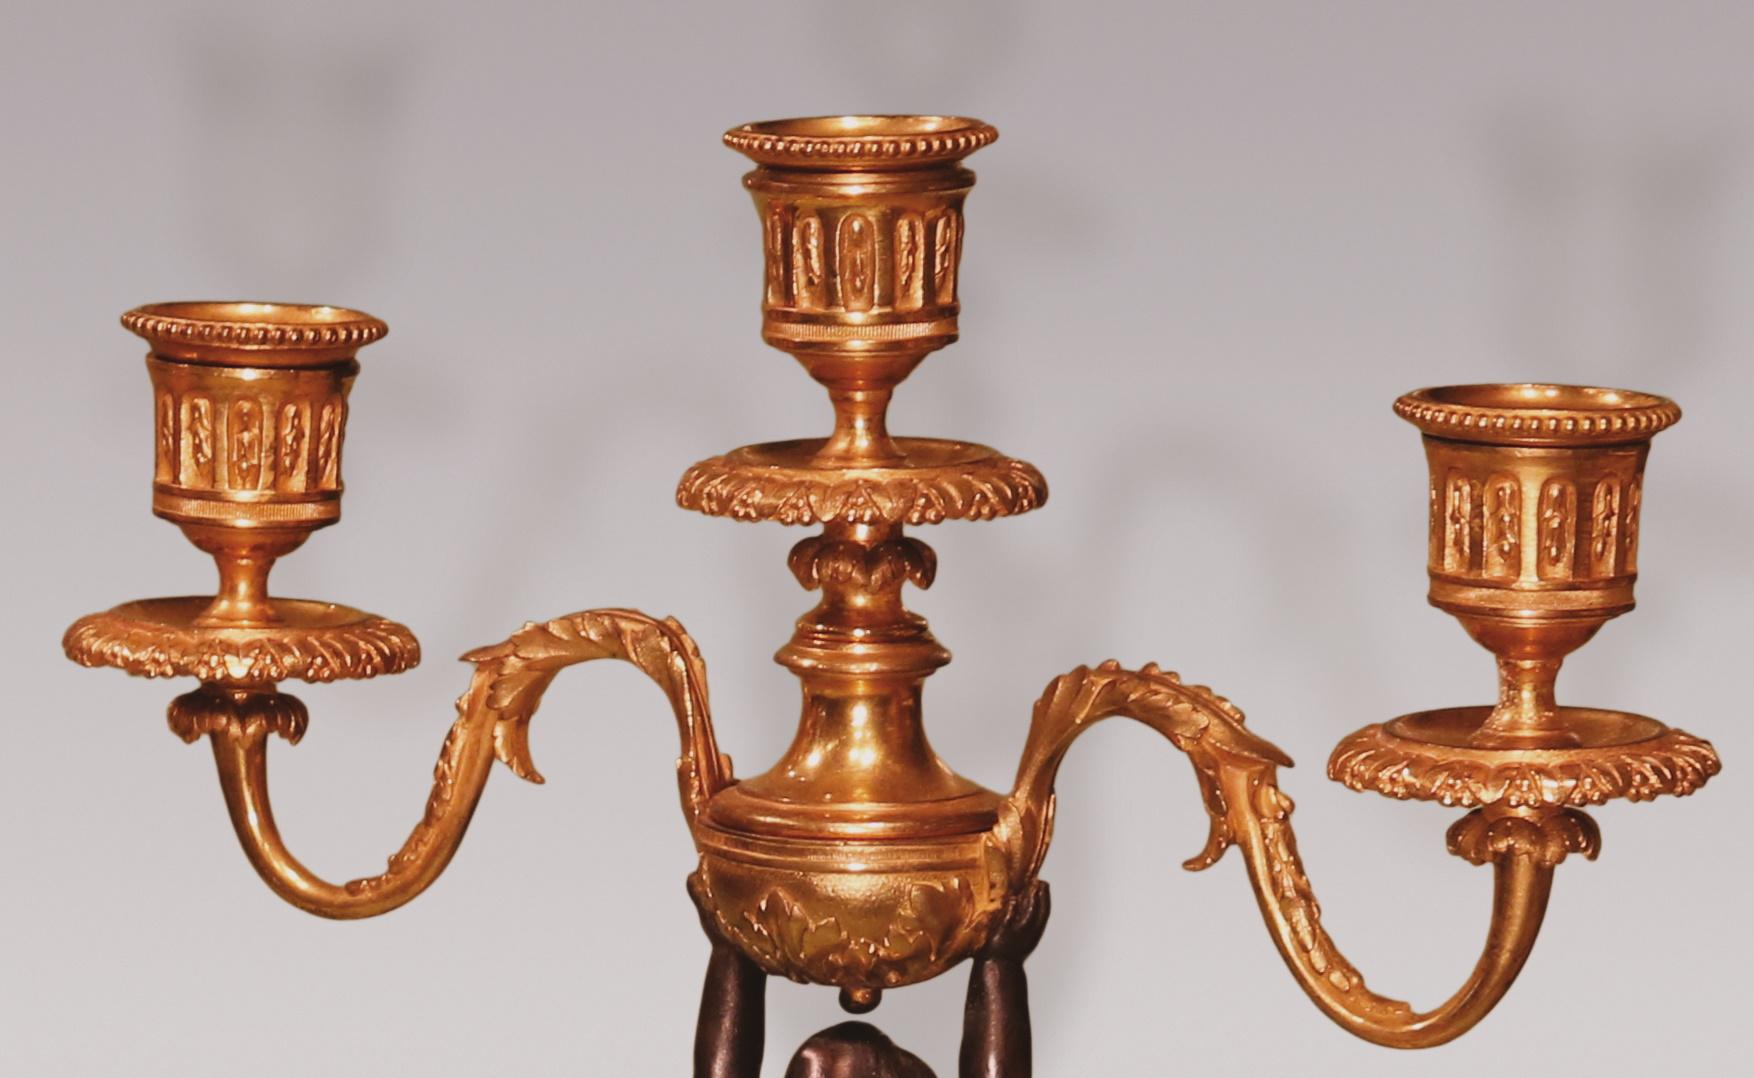 A pair of mid-19th century bronze and ormolu three-light candelabra, in the form of well-cast cherubs holding urns with well scrolled candle-arms, raised on wreath & beaded decorated socles, ending on white marble plinths on turned feet.